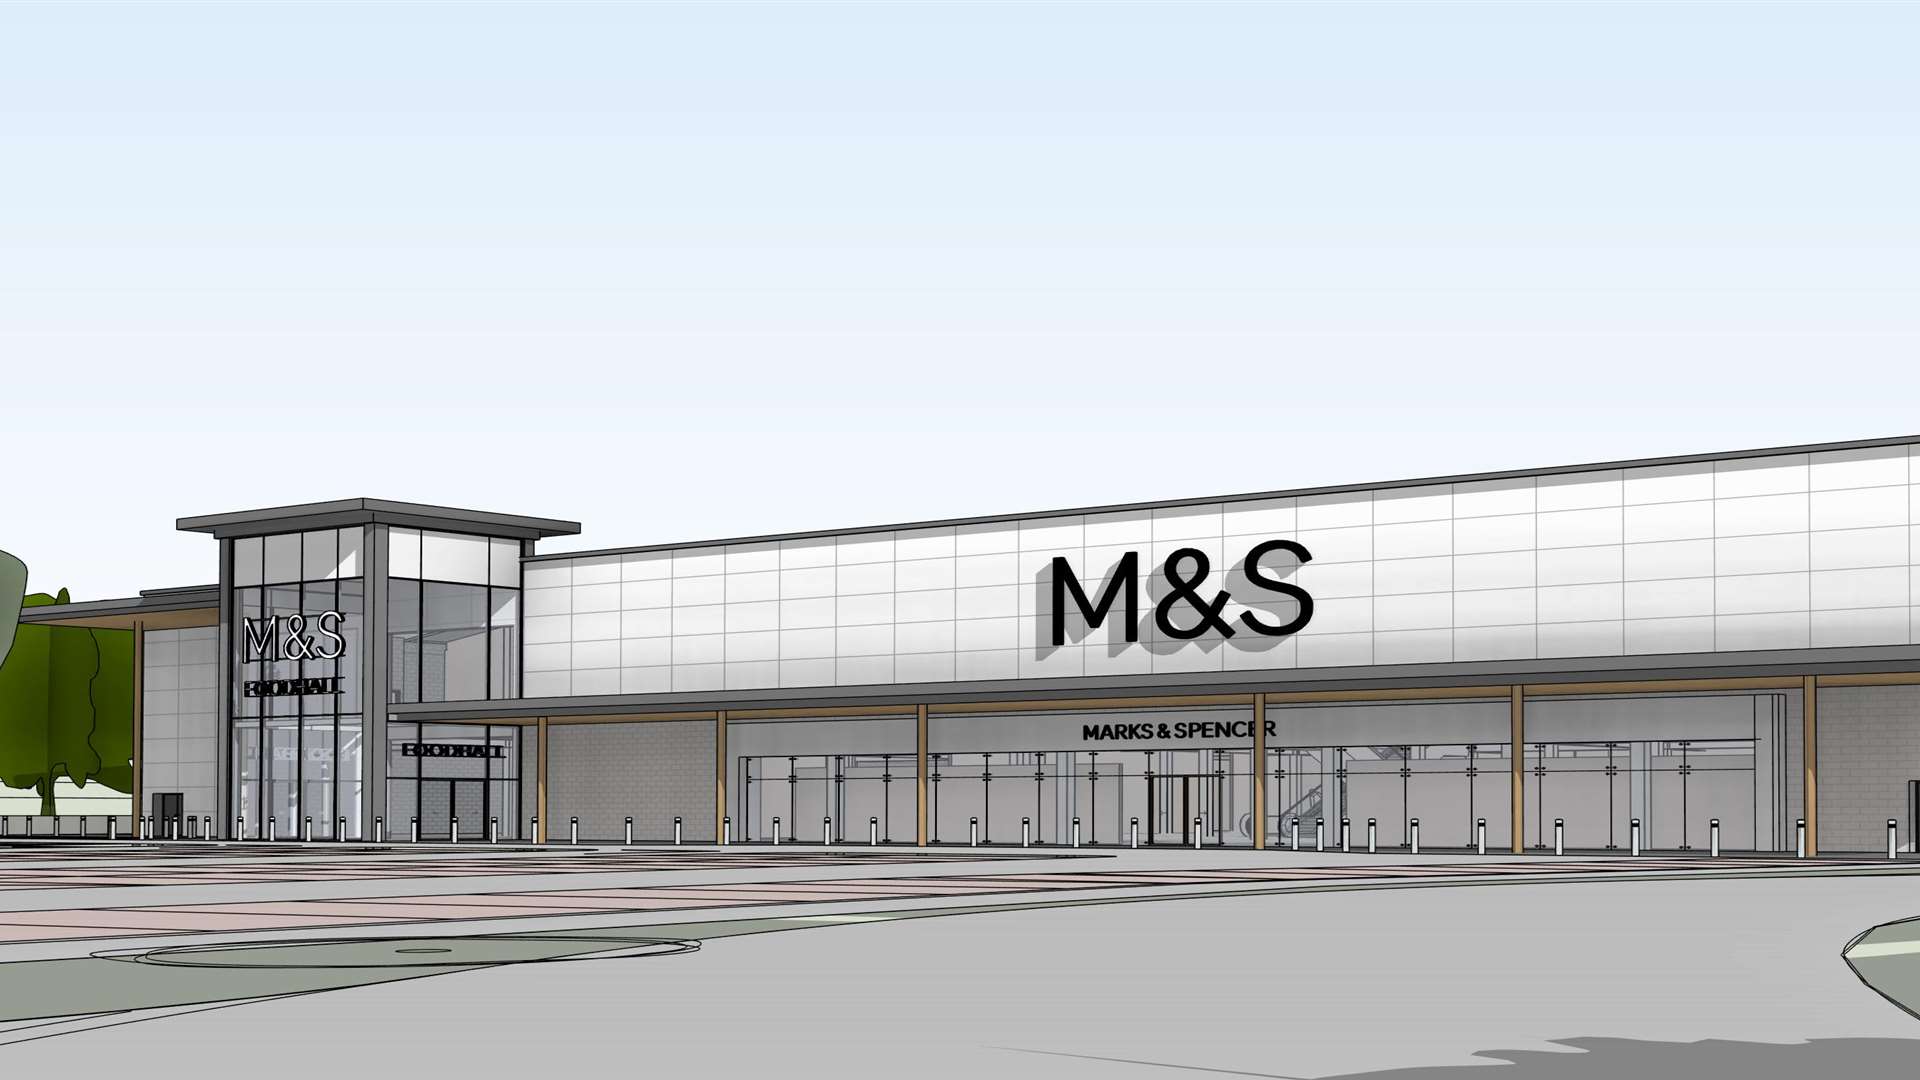 Developers say the proposed store will have a striking design.